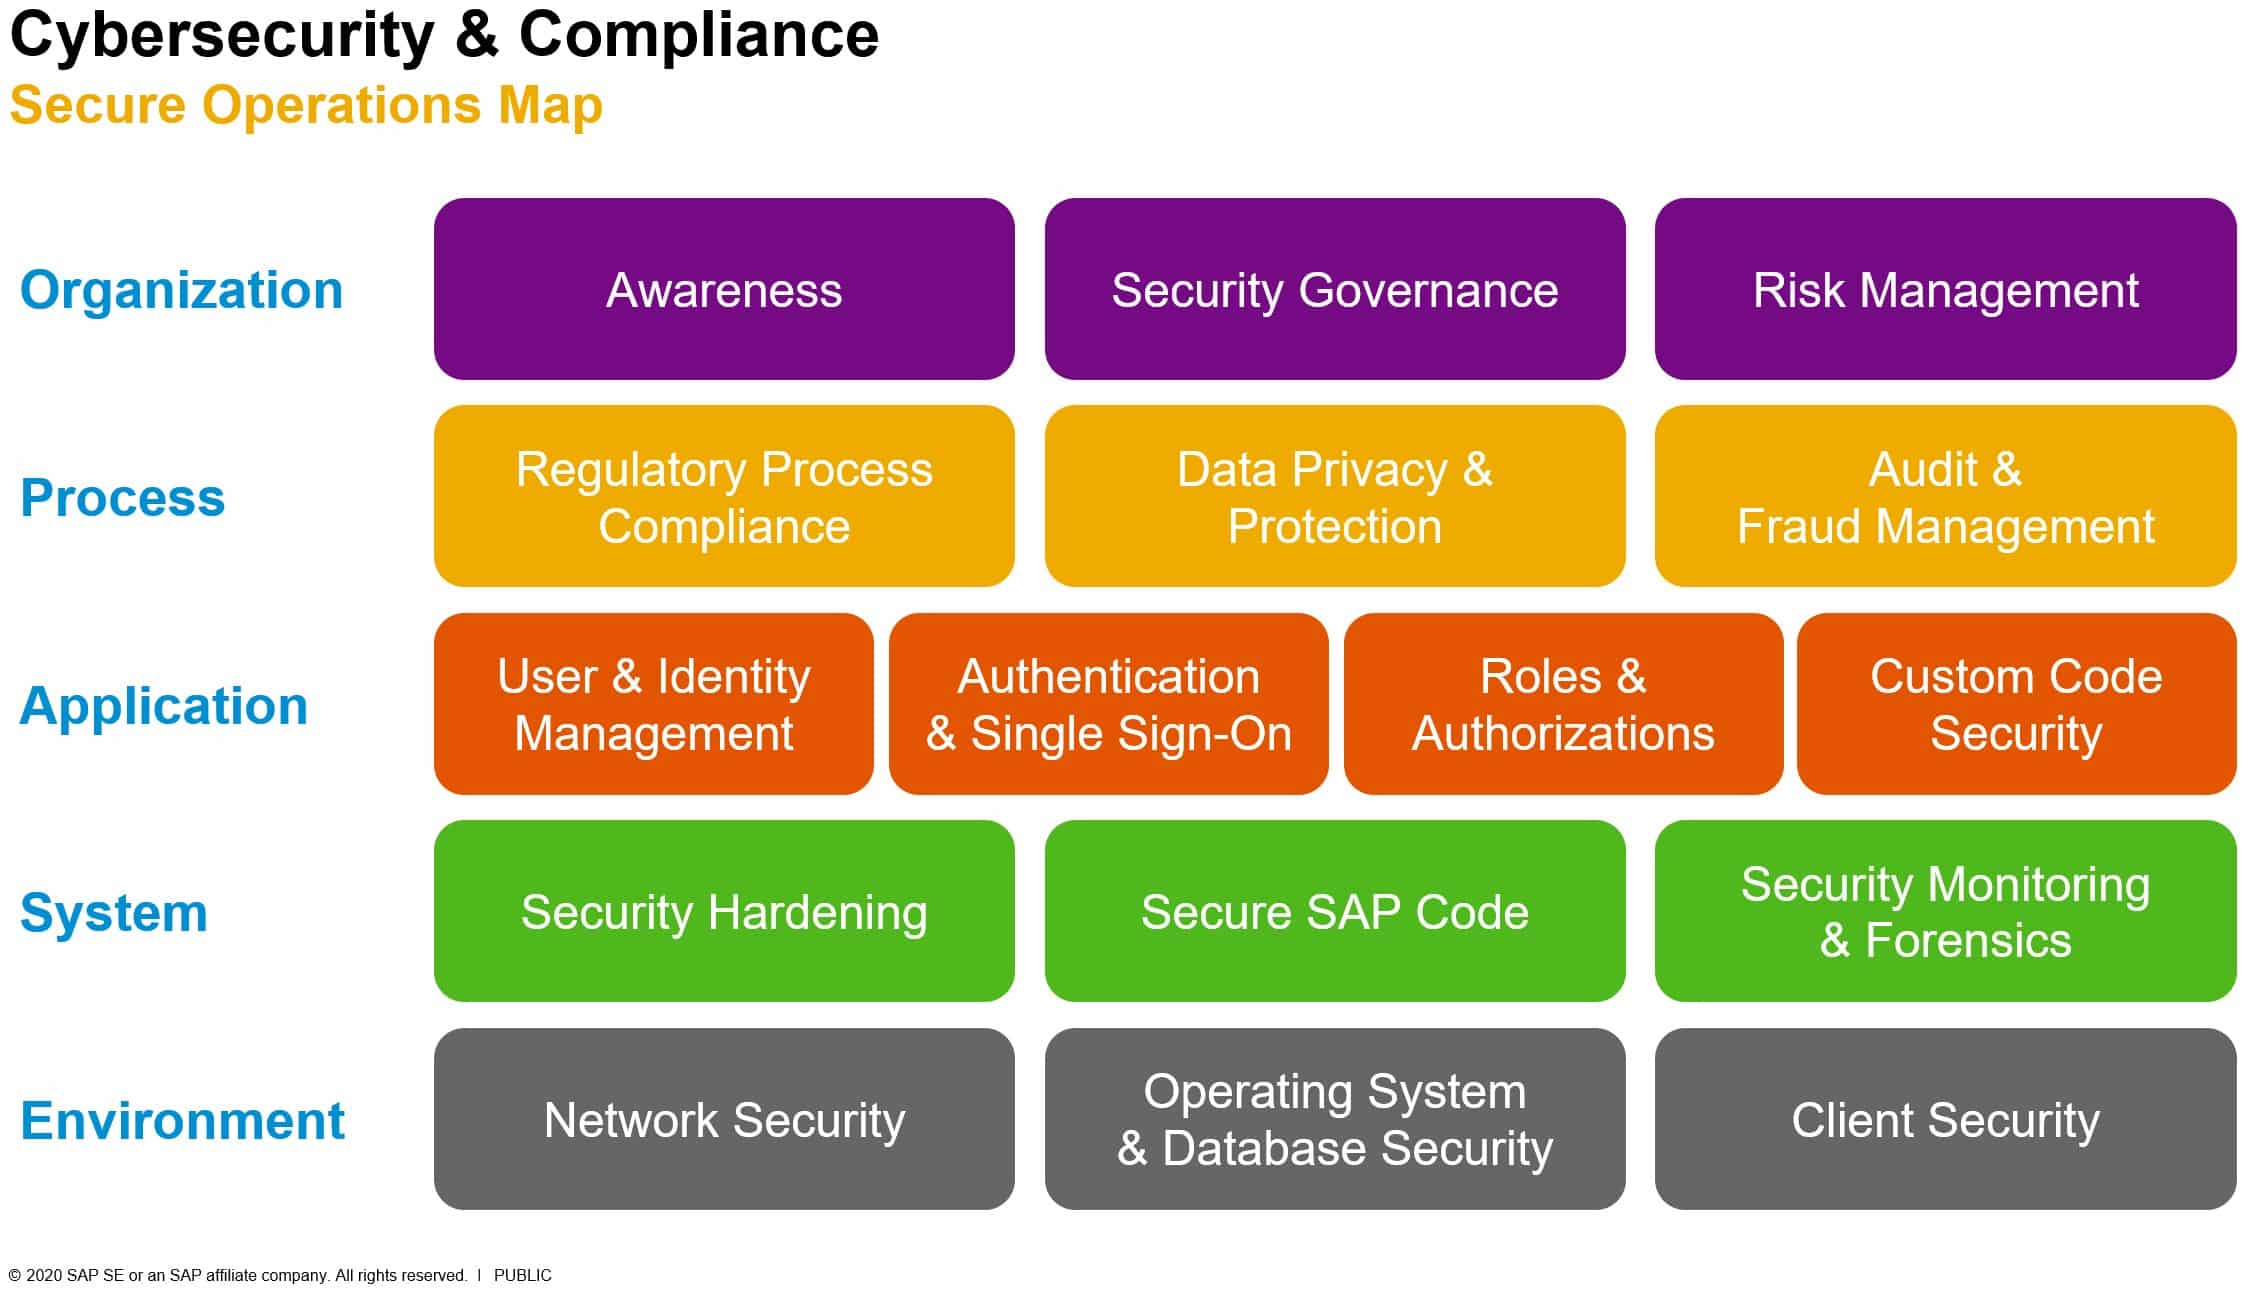 SAP Secure Operations Map